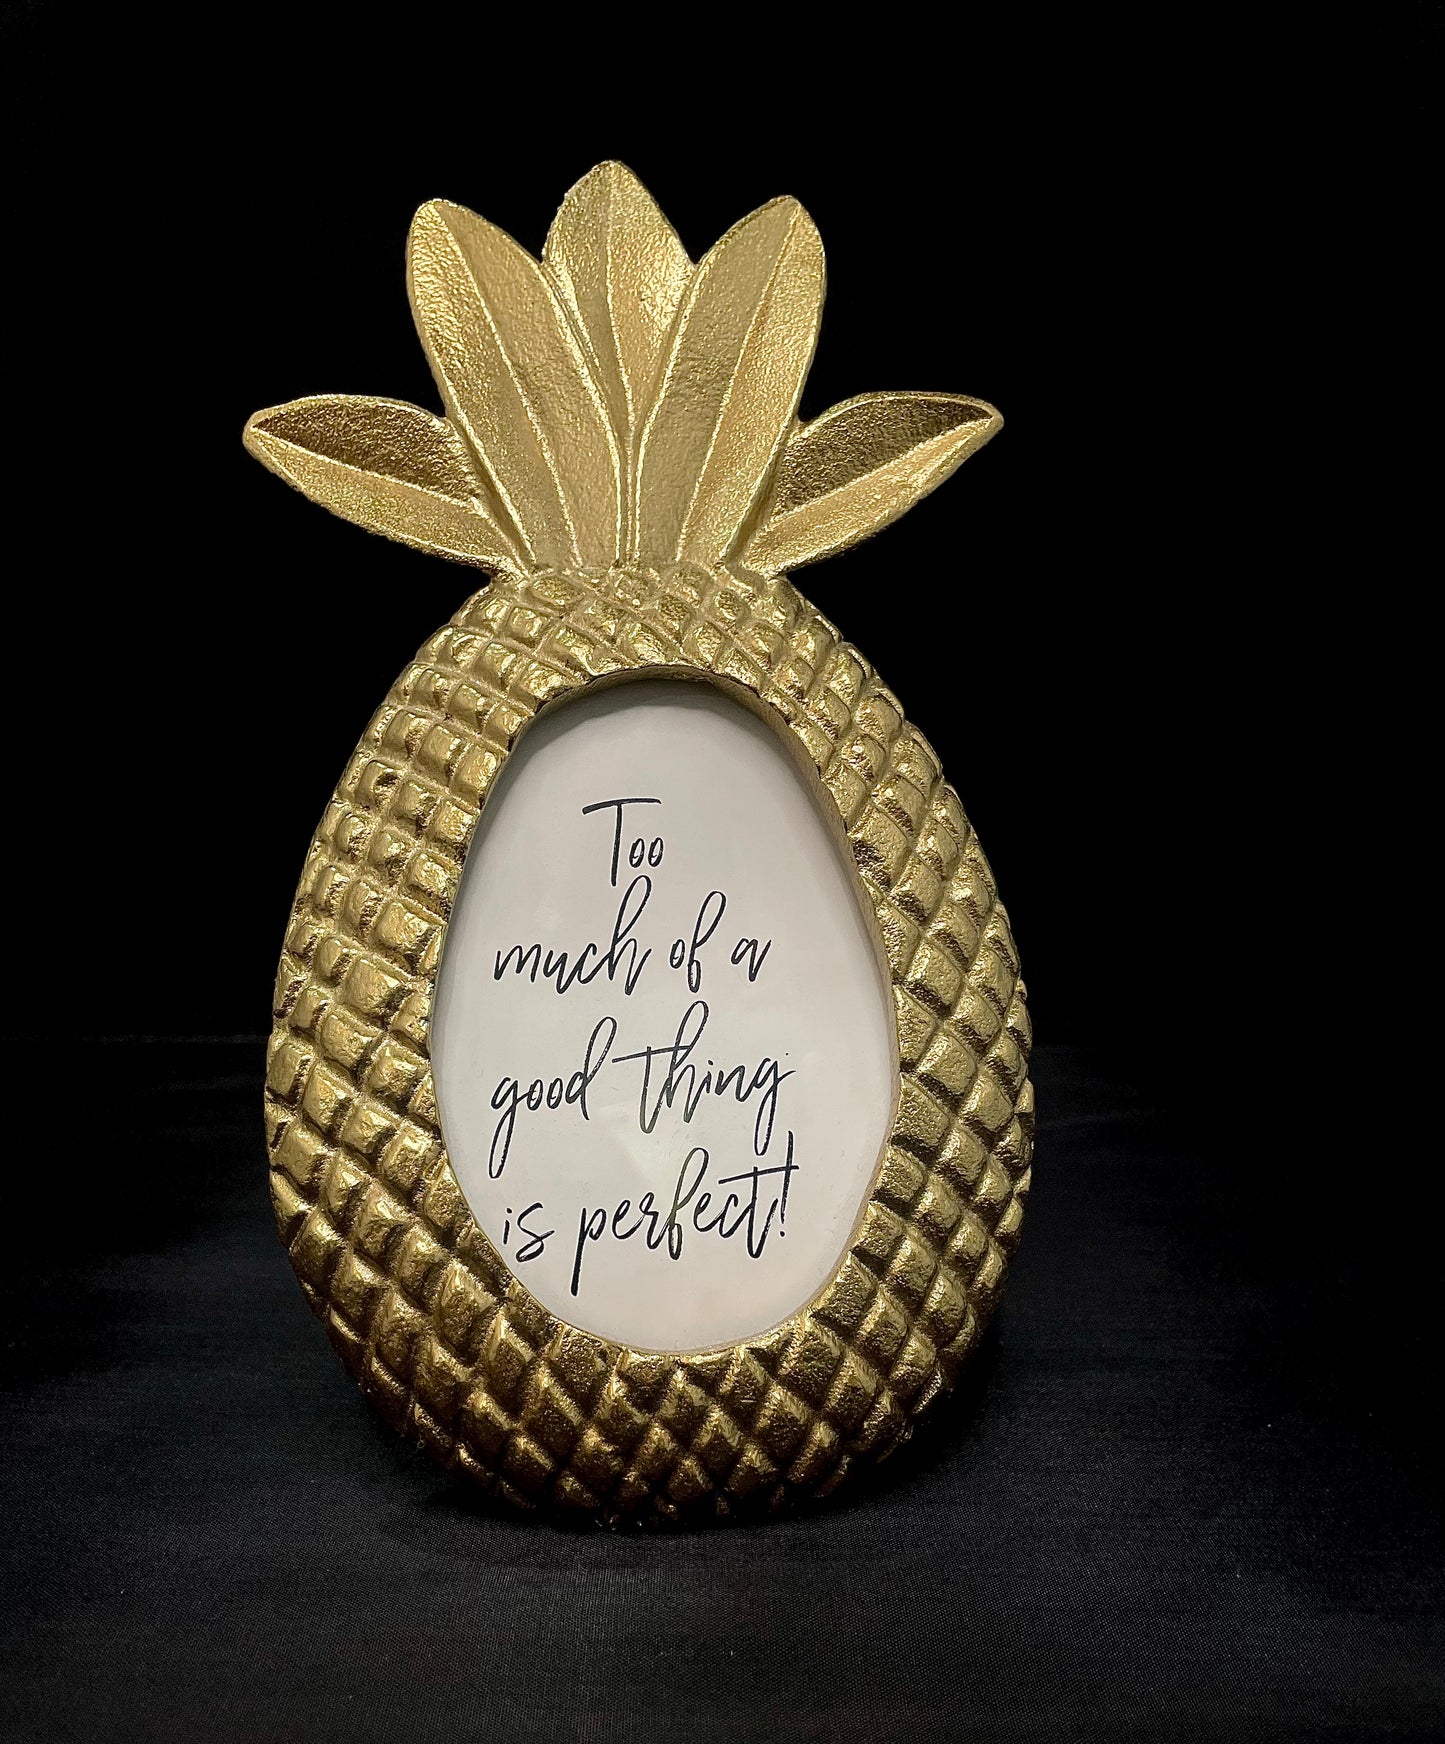 Pineapple Picture Frame